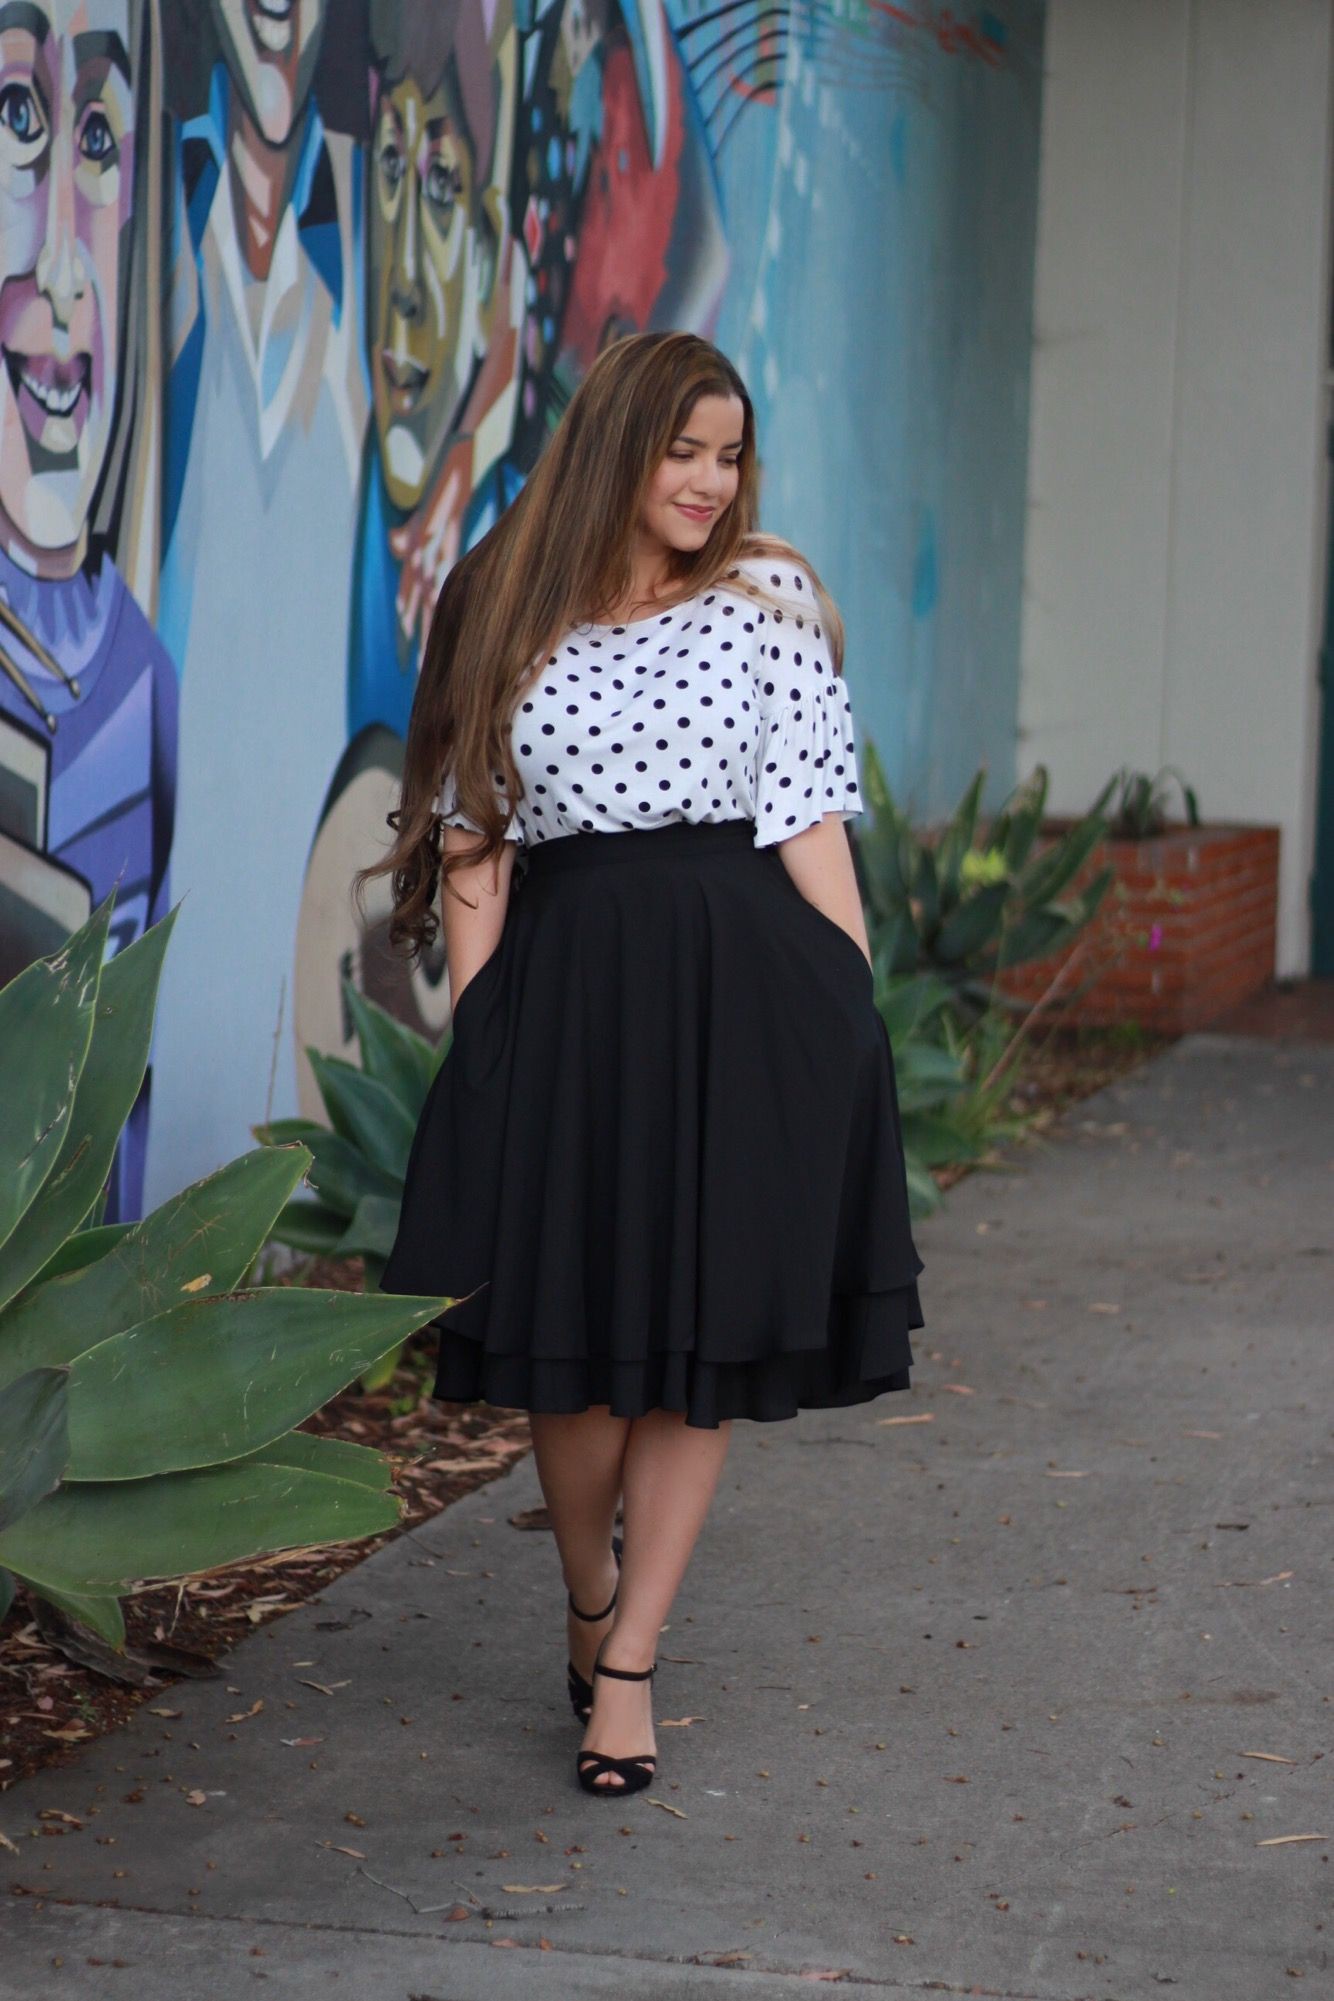 Wish to try fashion model, Plus-size model | Outfit With Midi Skirt ...